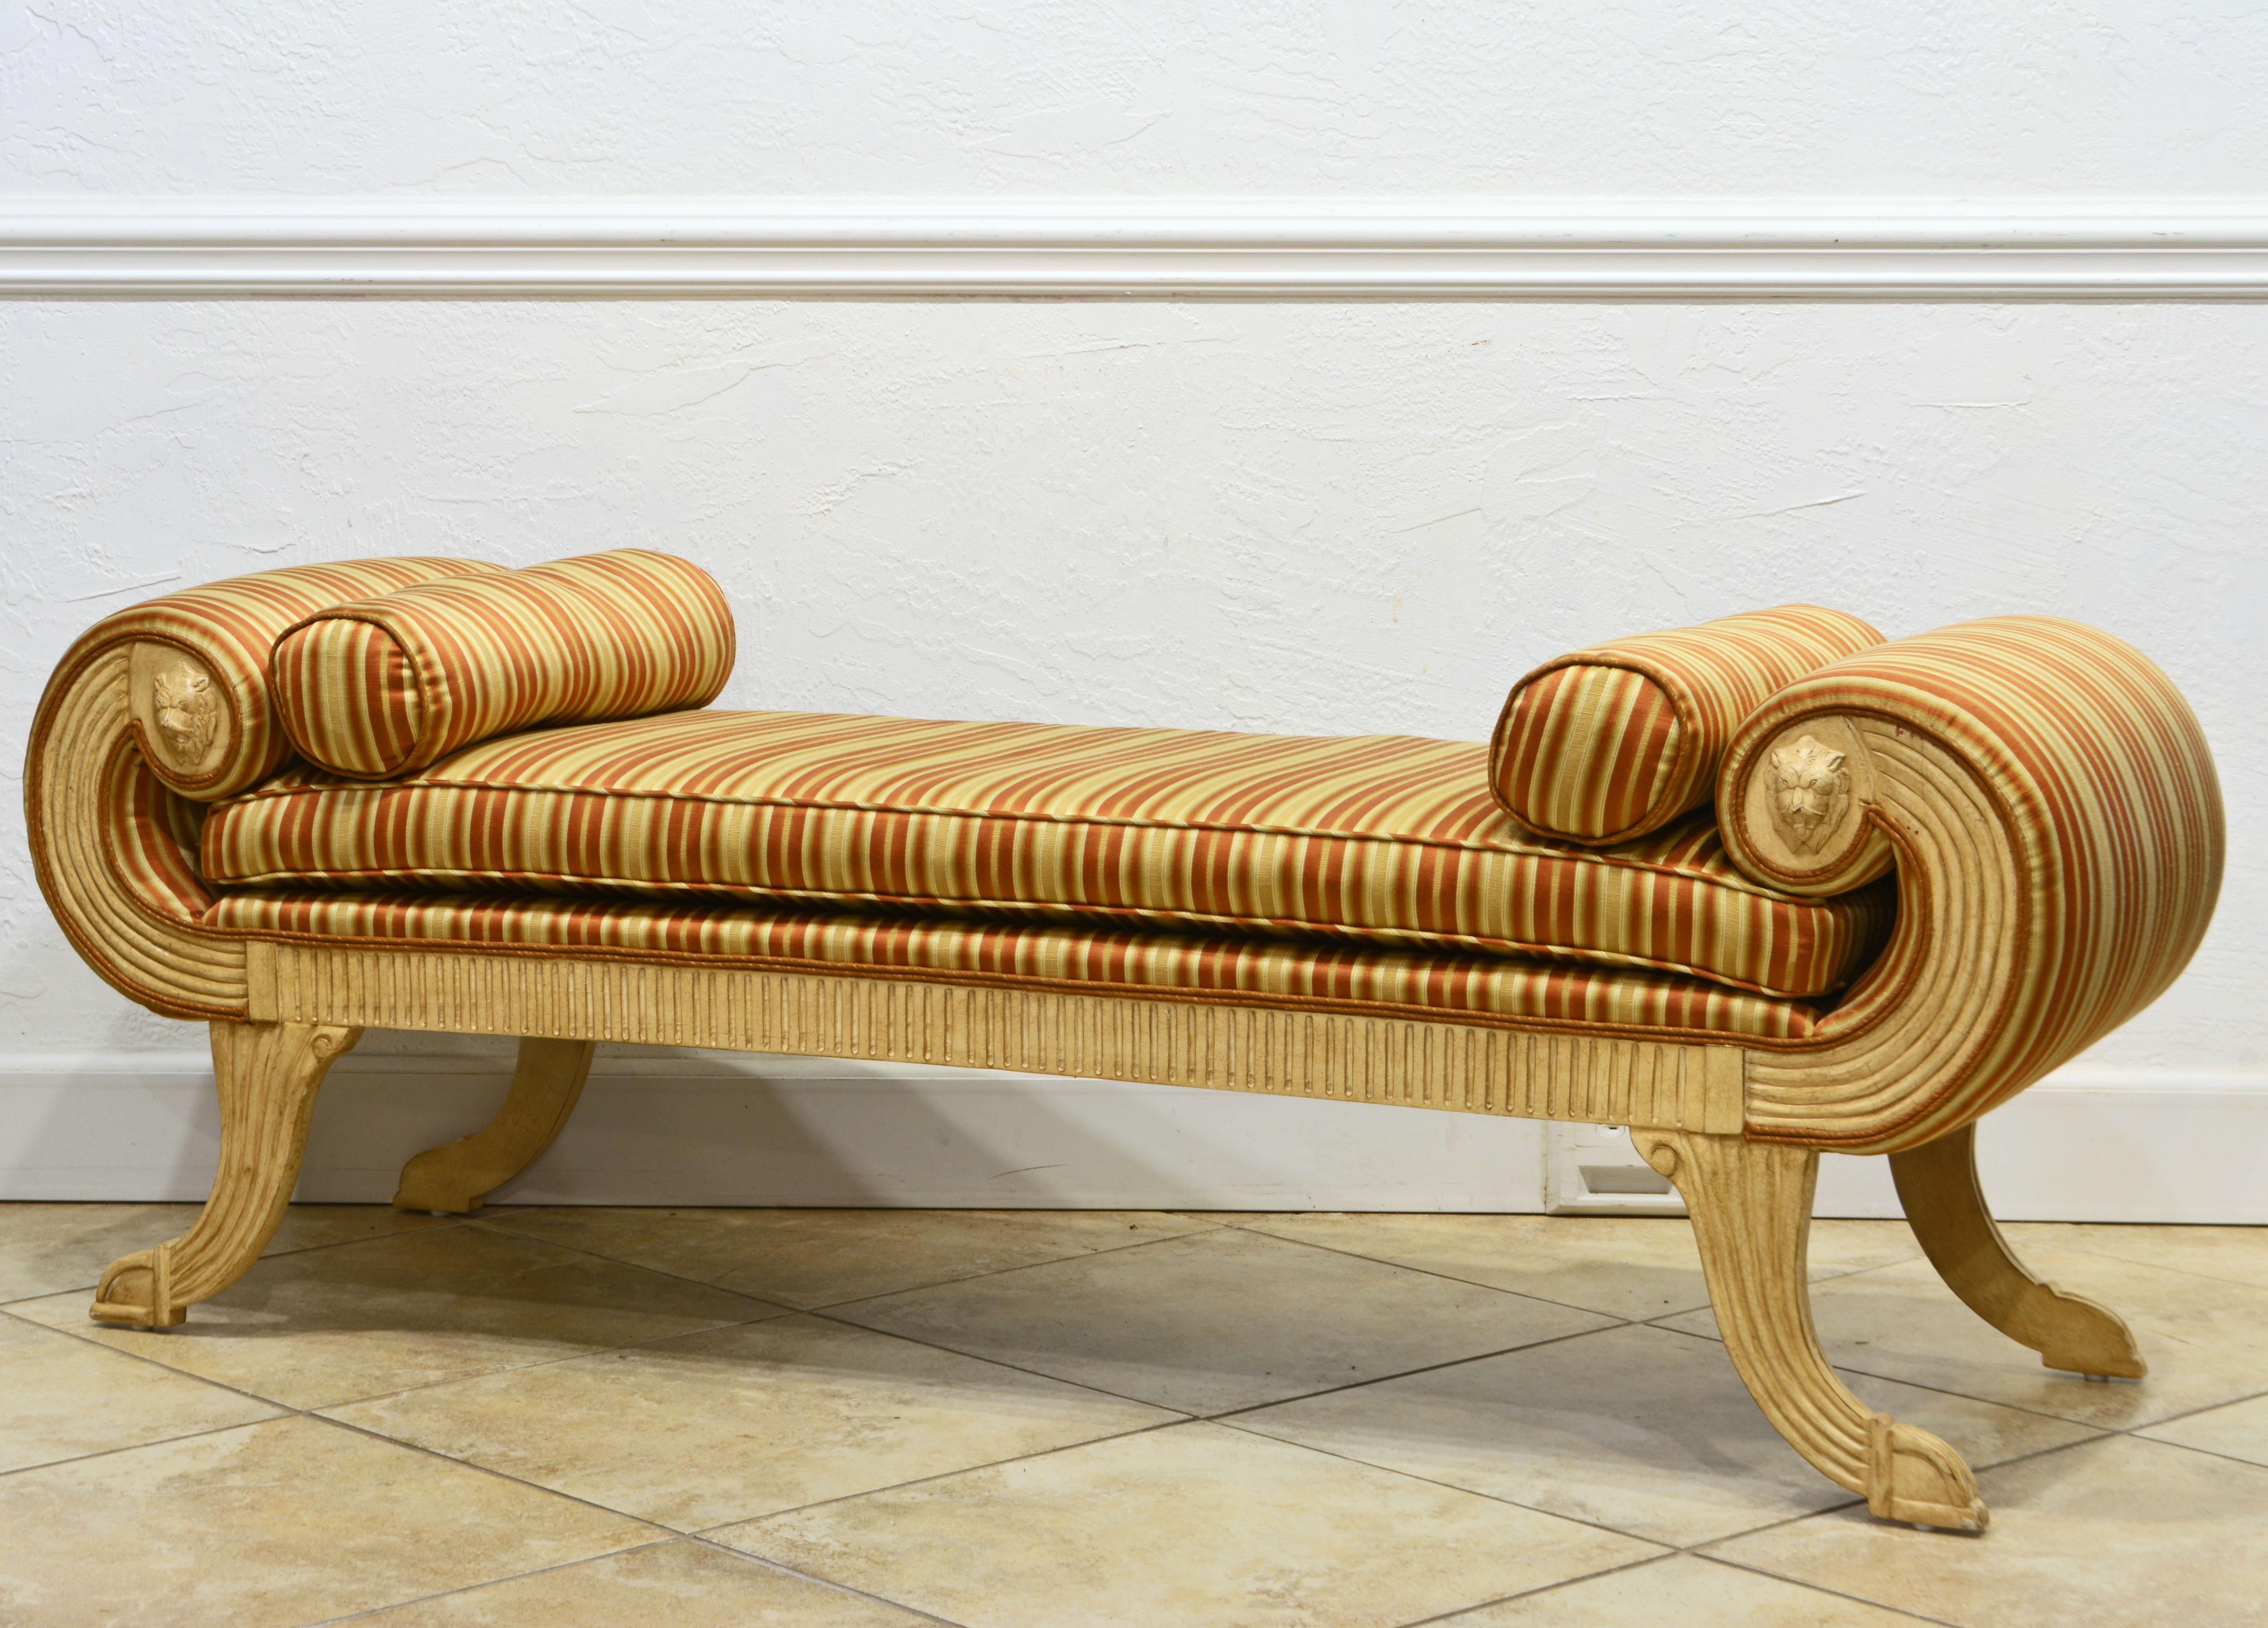 This distinguished neoclassical daybed with beautiful upholstery likely dates to the 1960's. It features an ivory white painted and reeded frame fashioned in the neoclassical or empire style and accented by carved lion's heads.